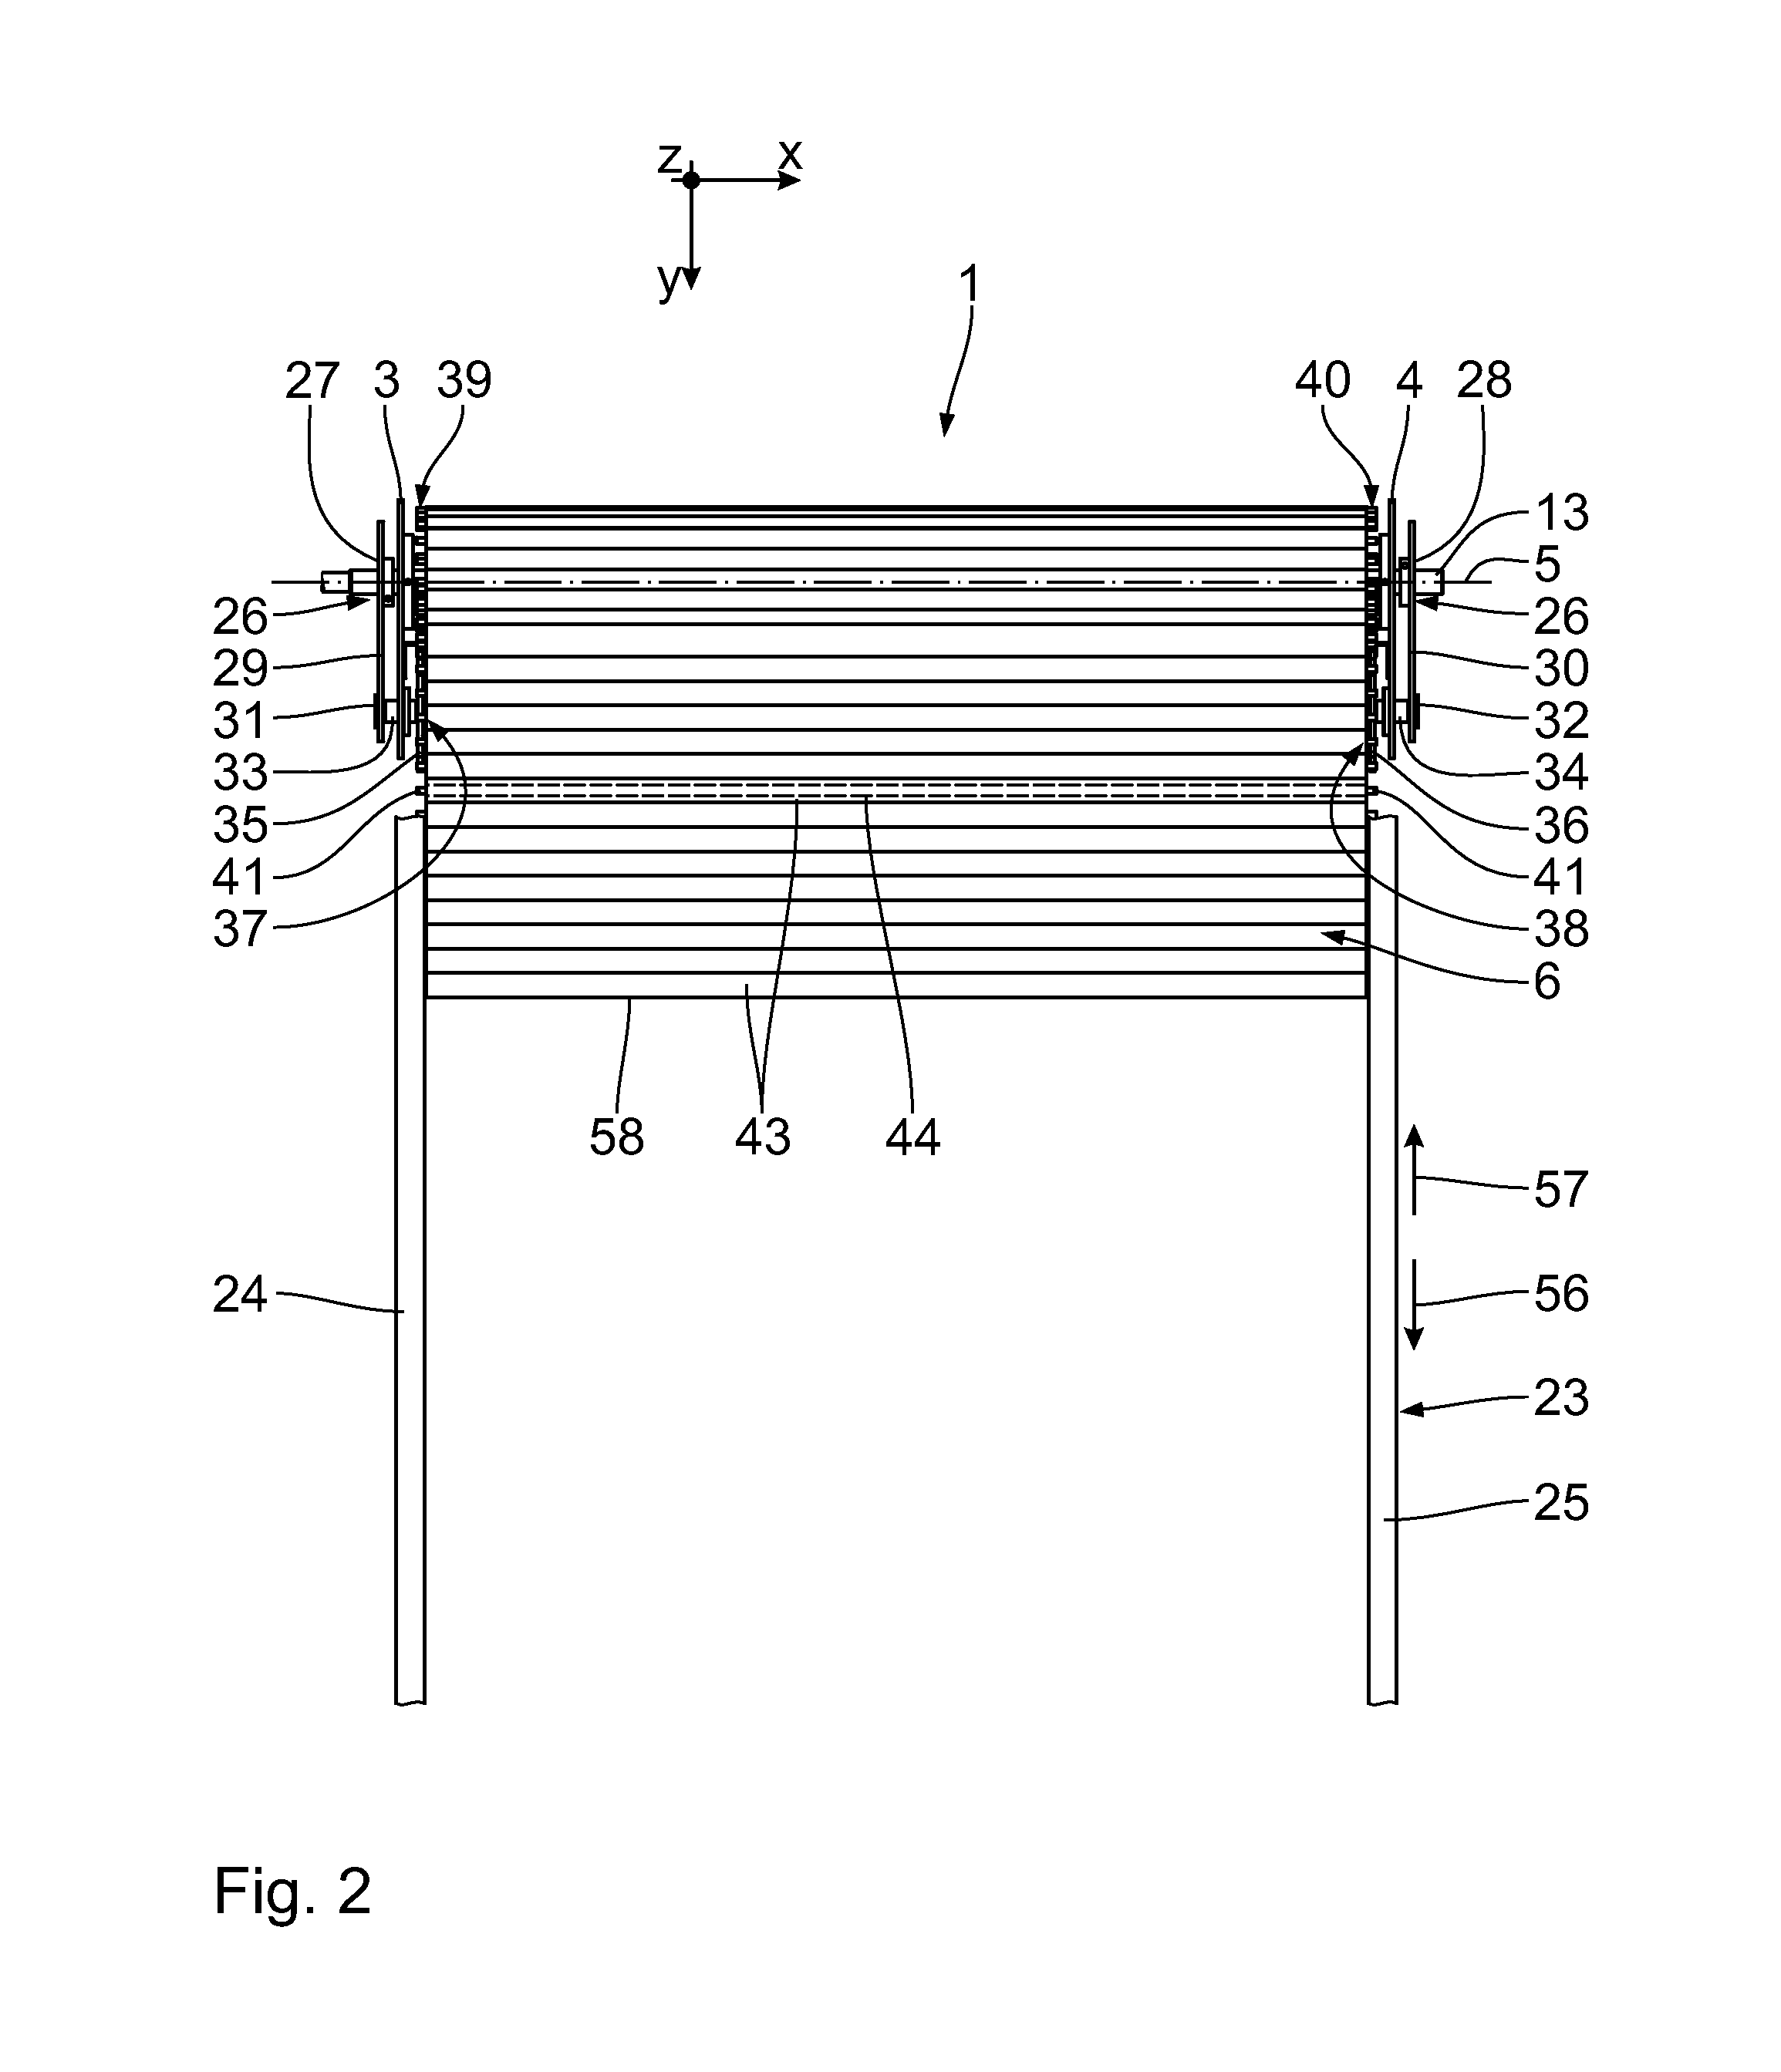 Covering device for openings, in particular for machine openings